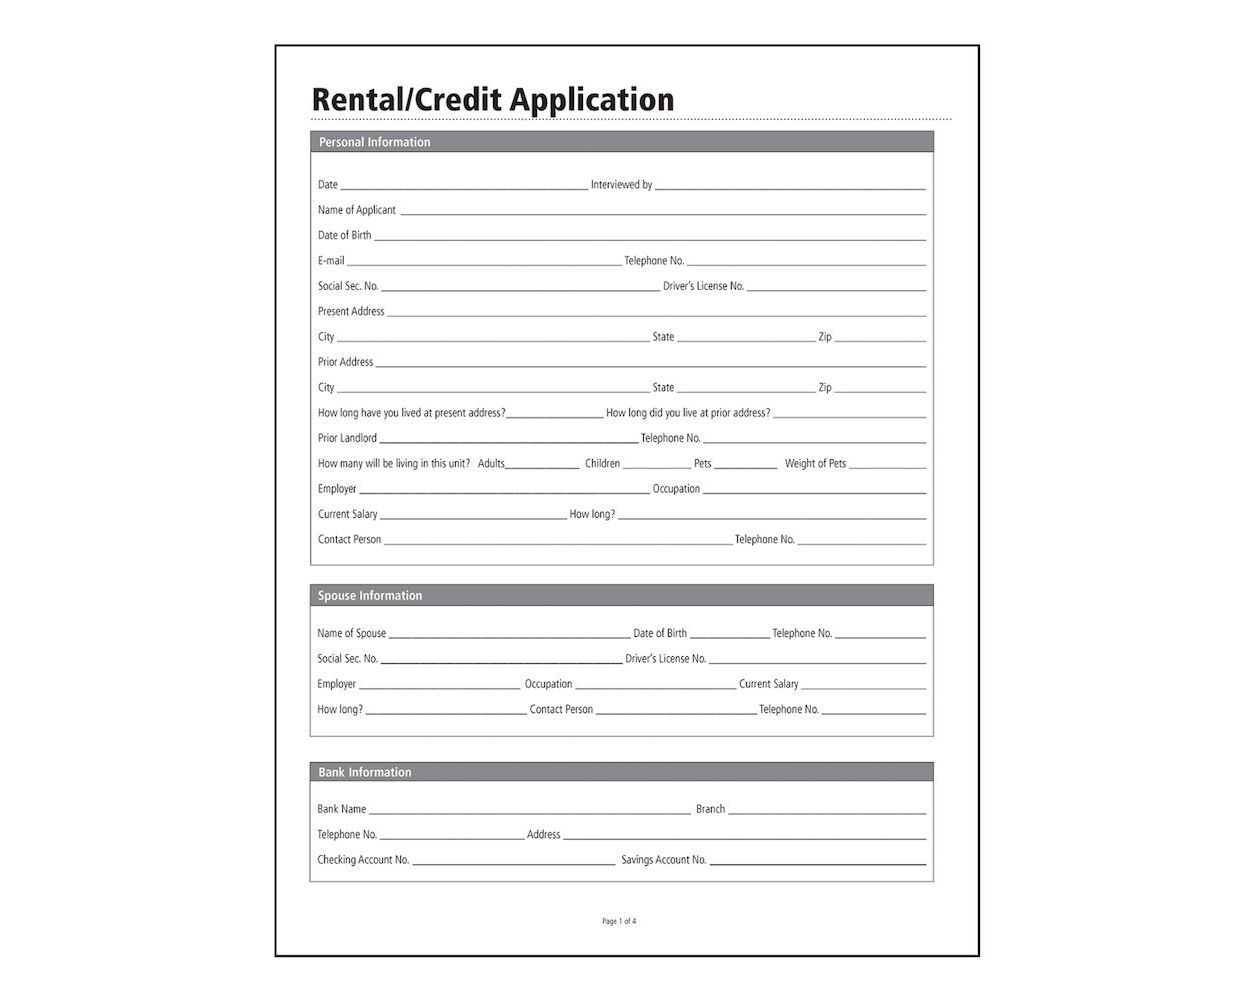 Adams Rental Credit Application Forms And Instructions